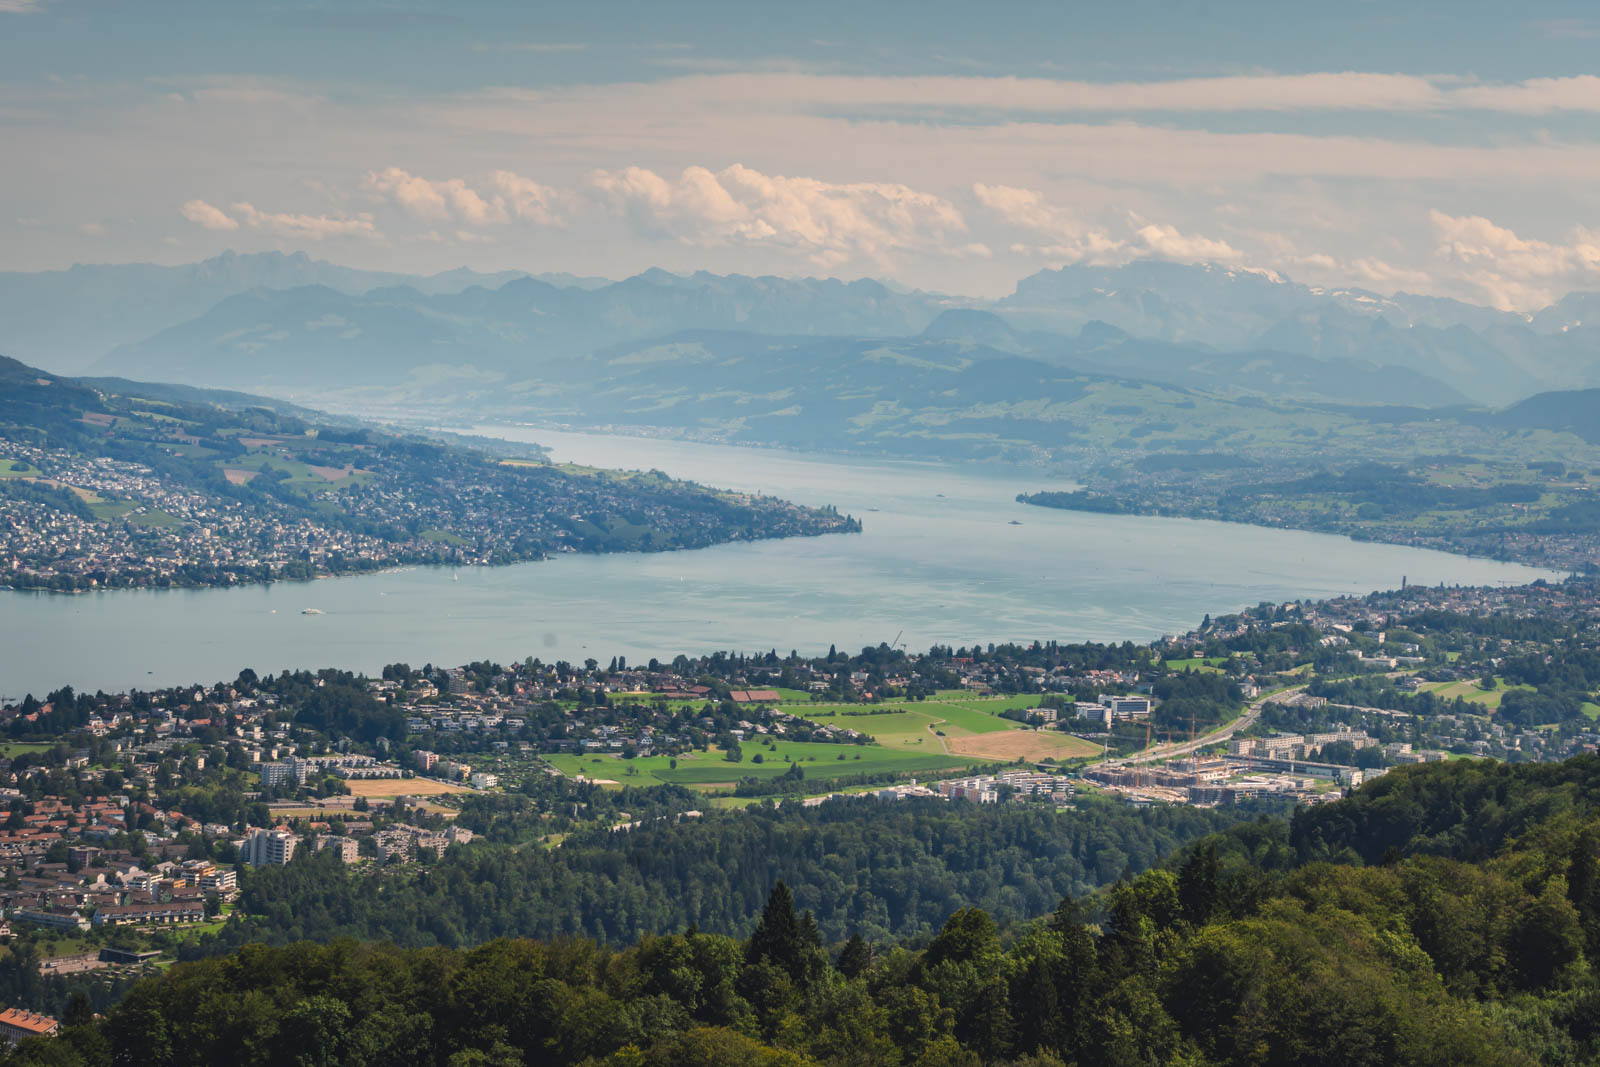 Highlights of staying in Enge, Zurich Uetliberg